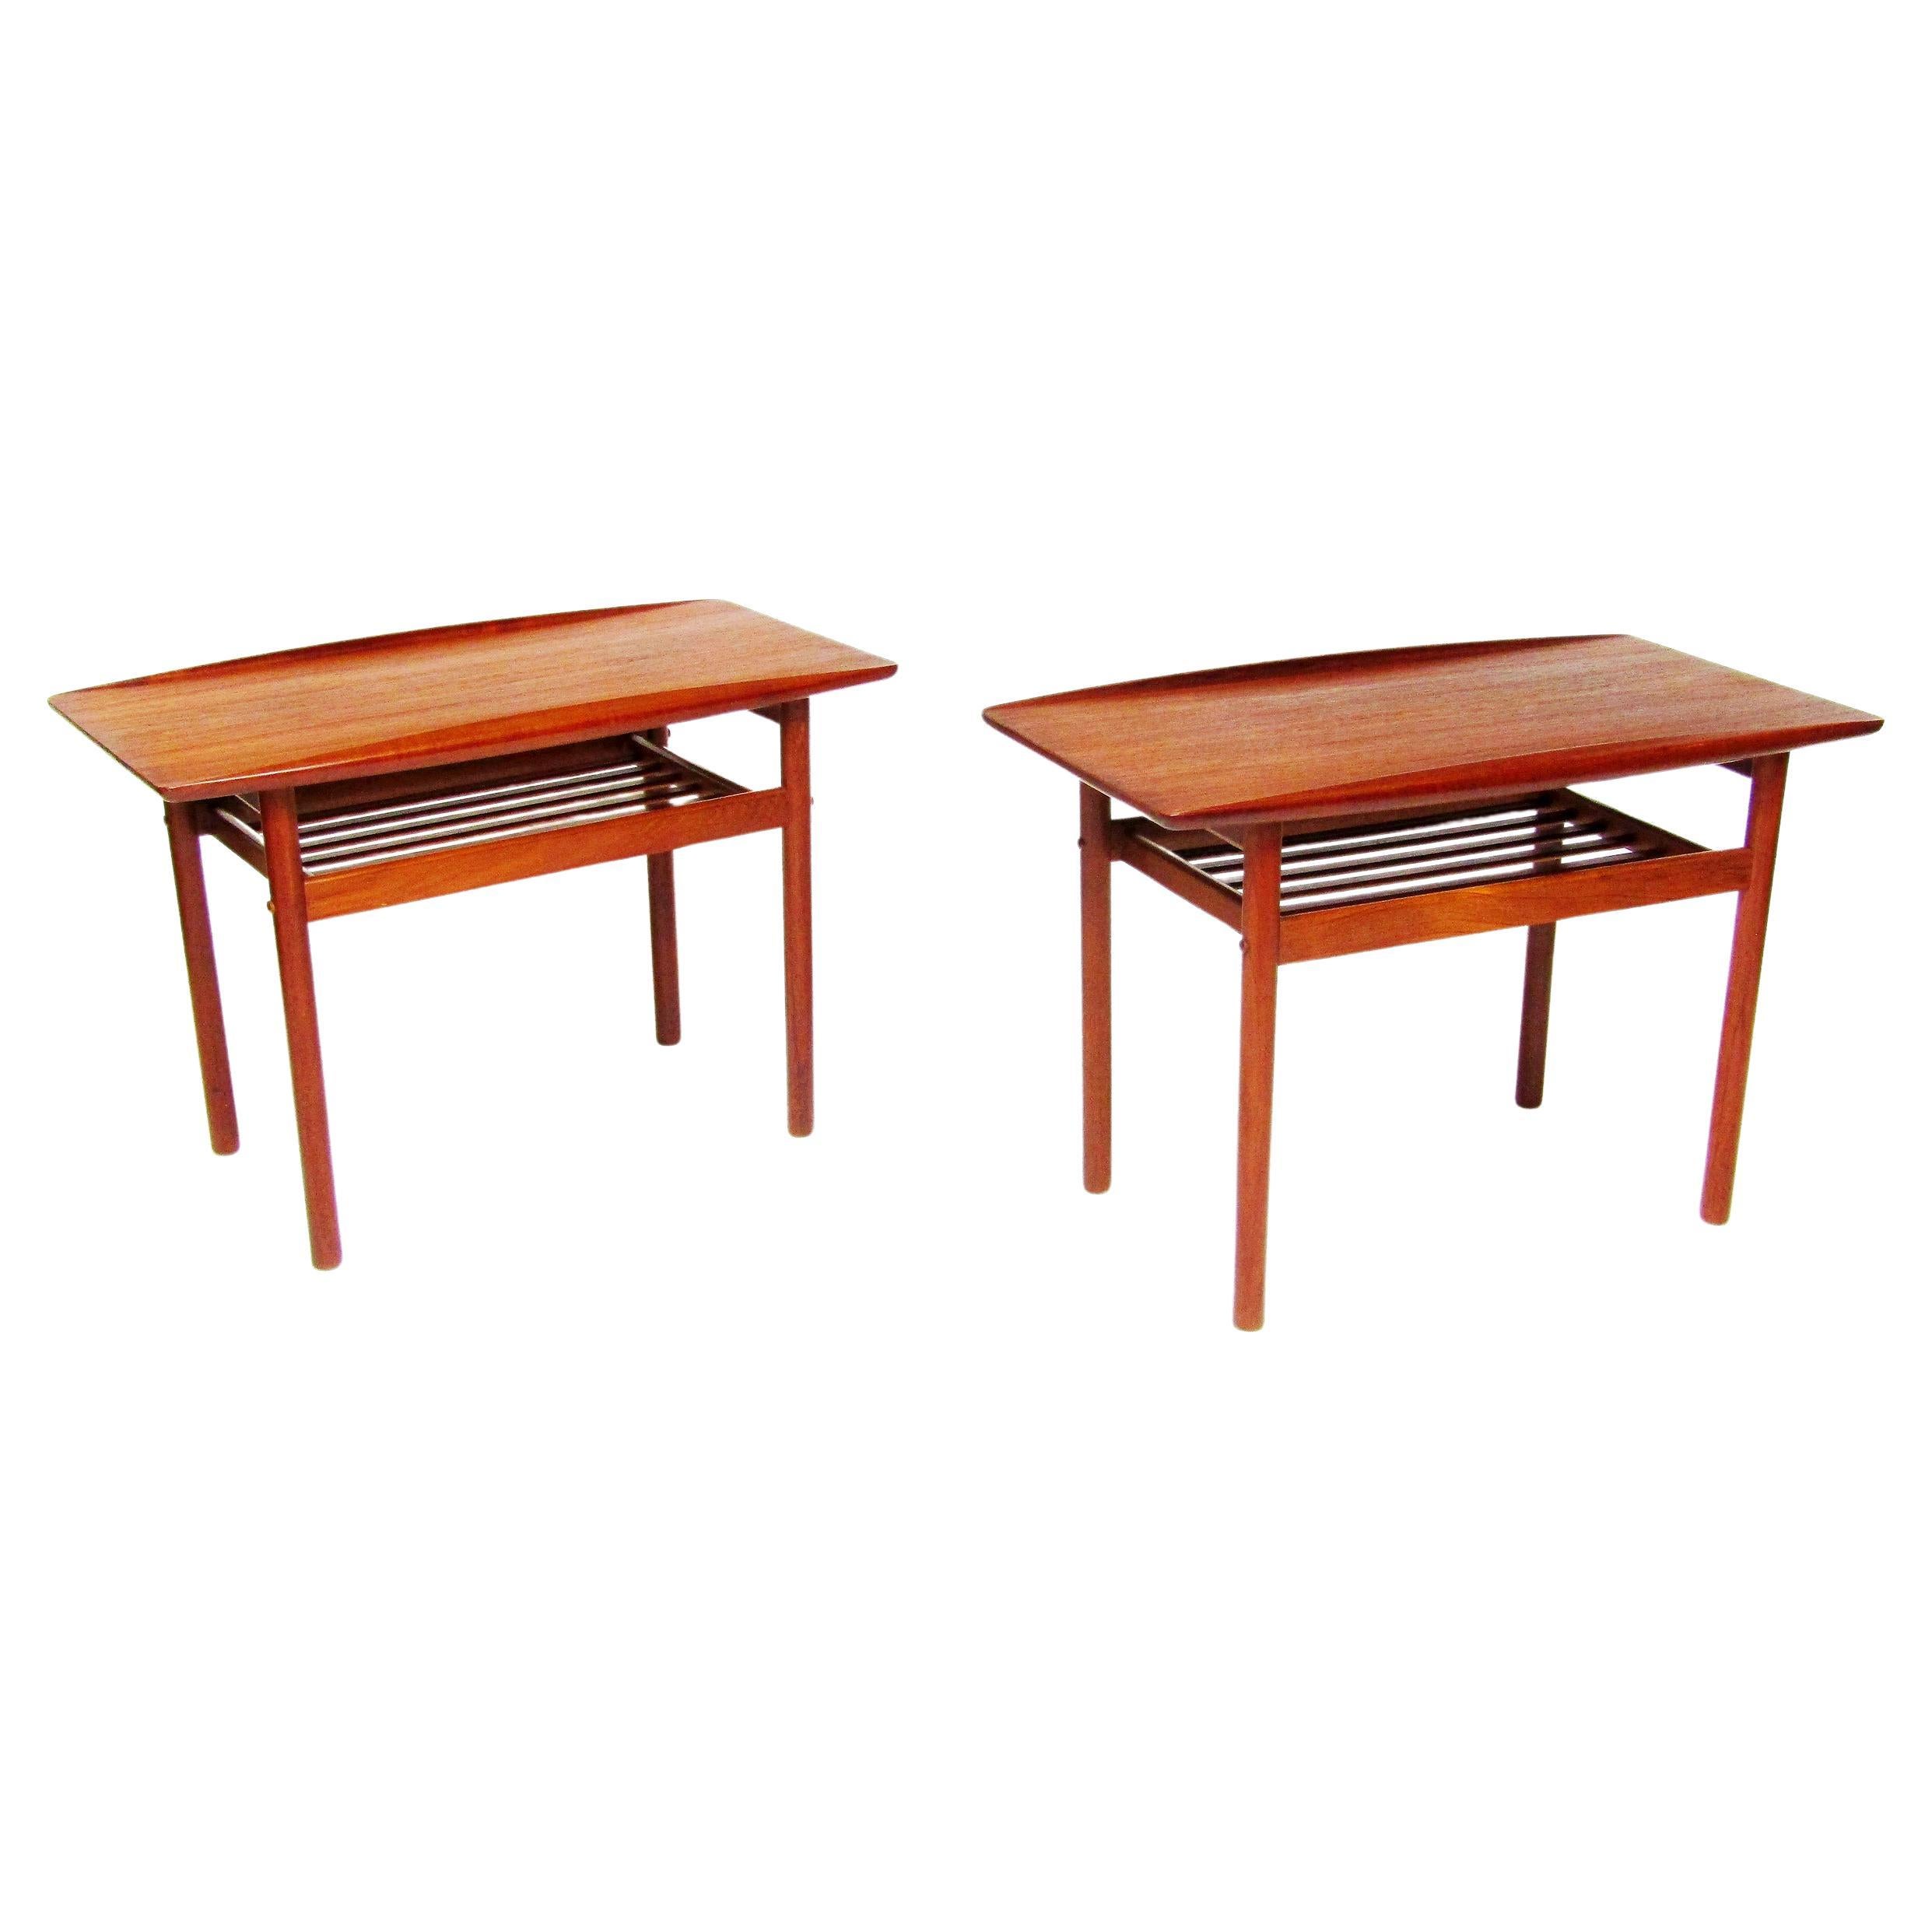 Pair Of Danish Surfboard Lamp Tables Or Night Stands In Teak By Grete Jalk For Sale